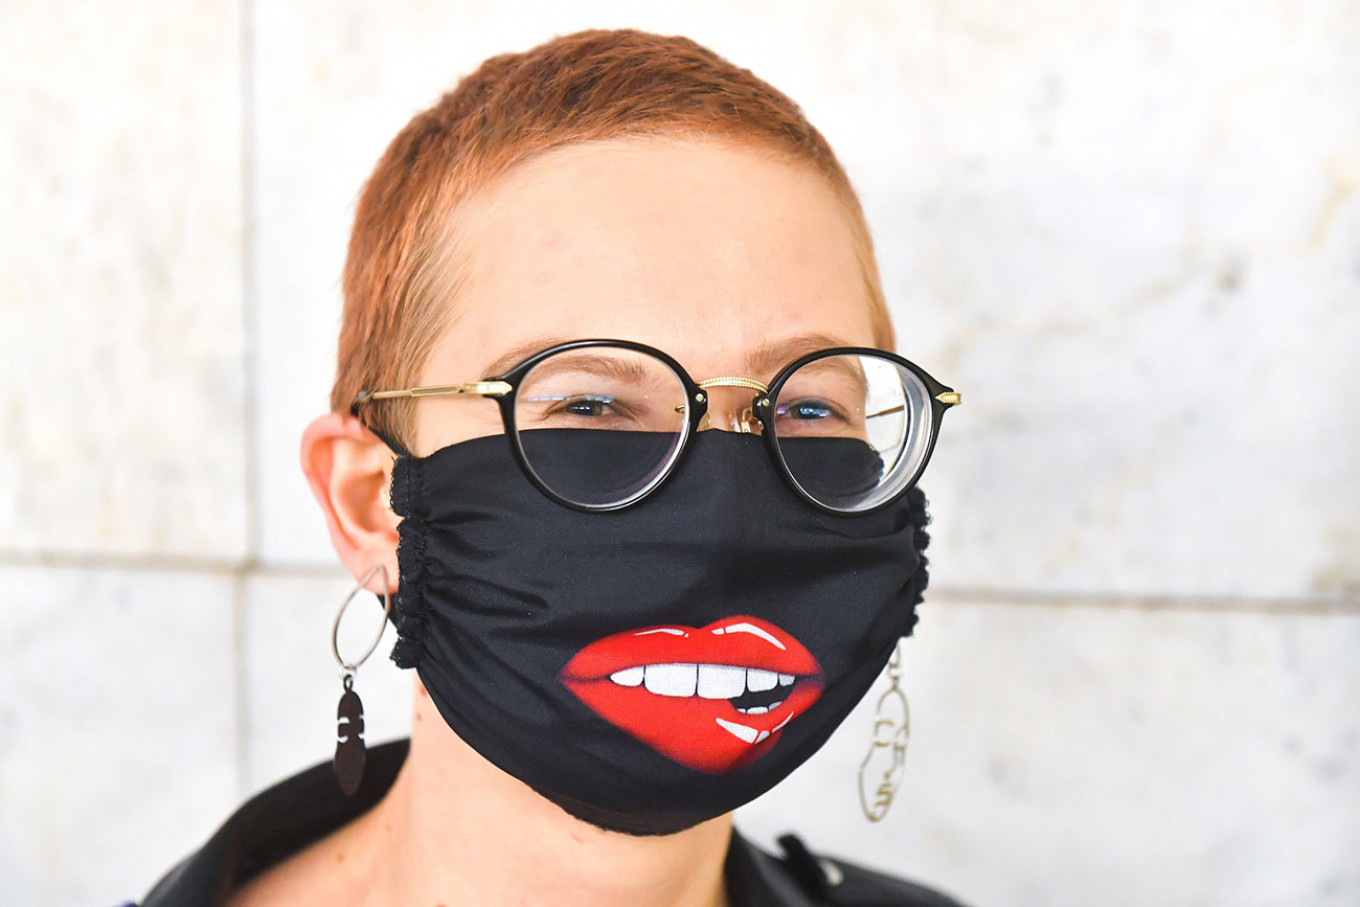 Moscow S Face Mask Fashions Embrace The Funny Weird And Nonsensical The Moscow Times